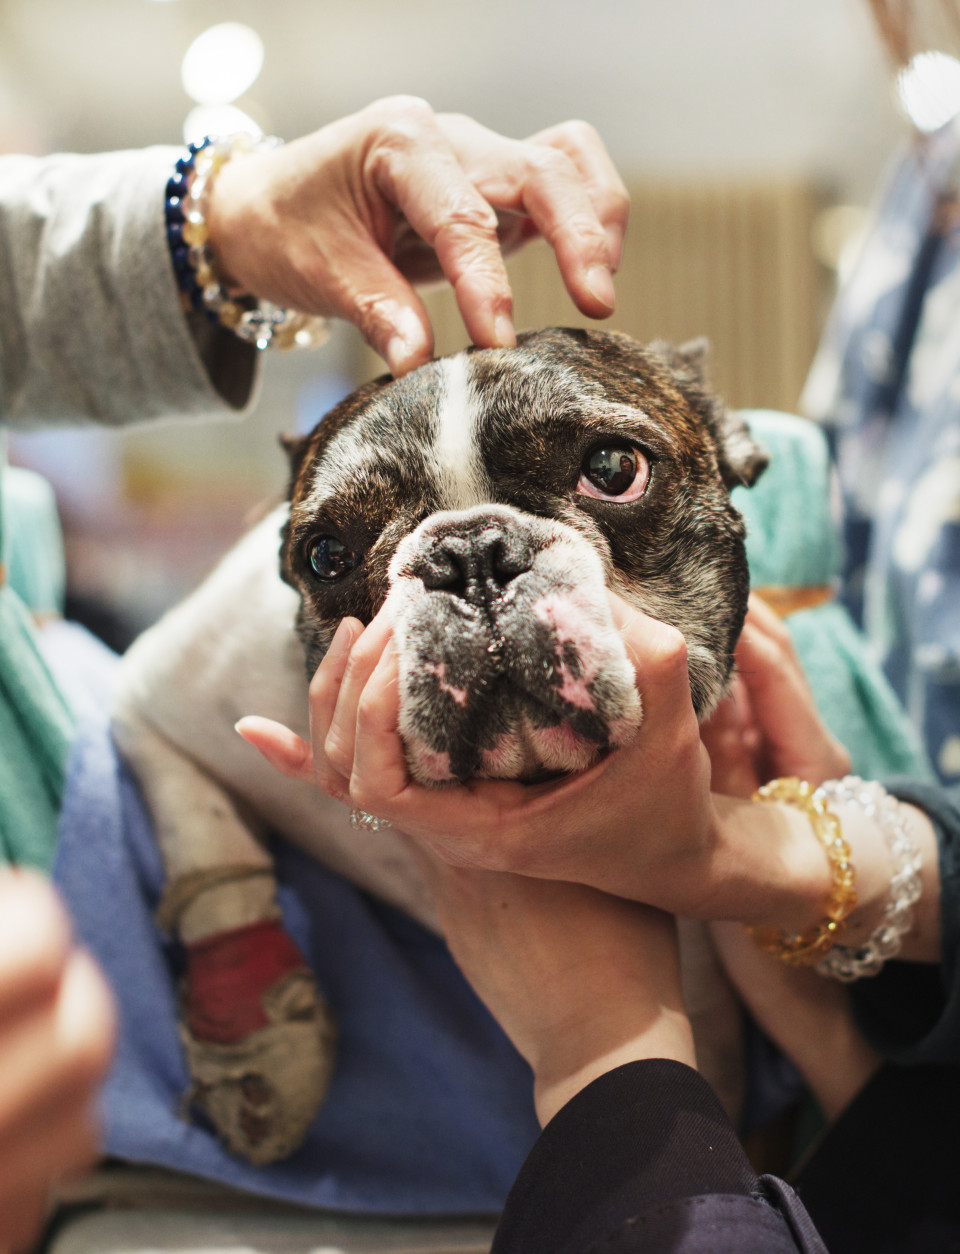 TOKYO, JAPAN - APRIL 12:  Oreo, a Bulldog receives acupuncture therapy to help fix his flow of Qi energy enhance his self healing power at the Marina Street Okada animal hospital on April 12, 2013 in Tokyo Japan. The number of pet dogs in Japan has been increasing steadily to 11.5 million animals, almost one-fifth households. One-tenth of Japanese families have at least one dog, according to the survey of Japan Pet Food Association.  (Photo by Adam Pretty/Getty Images)